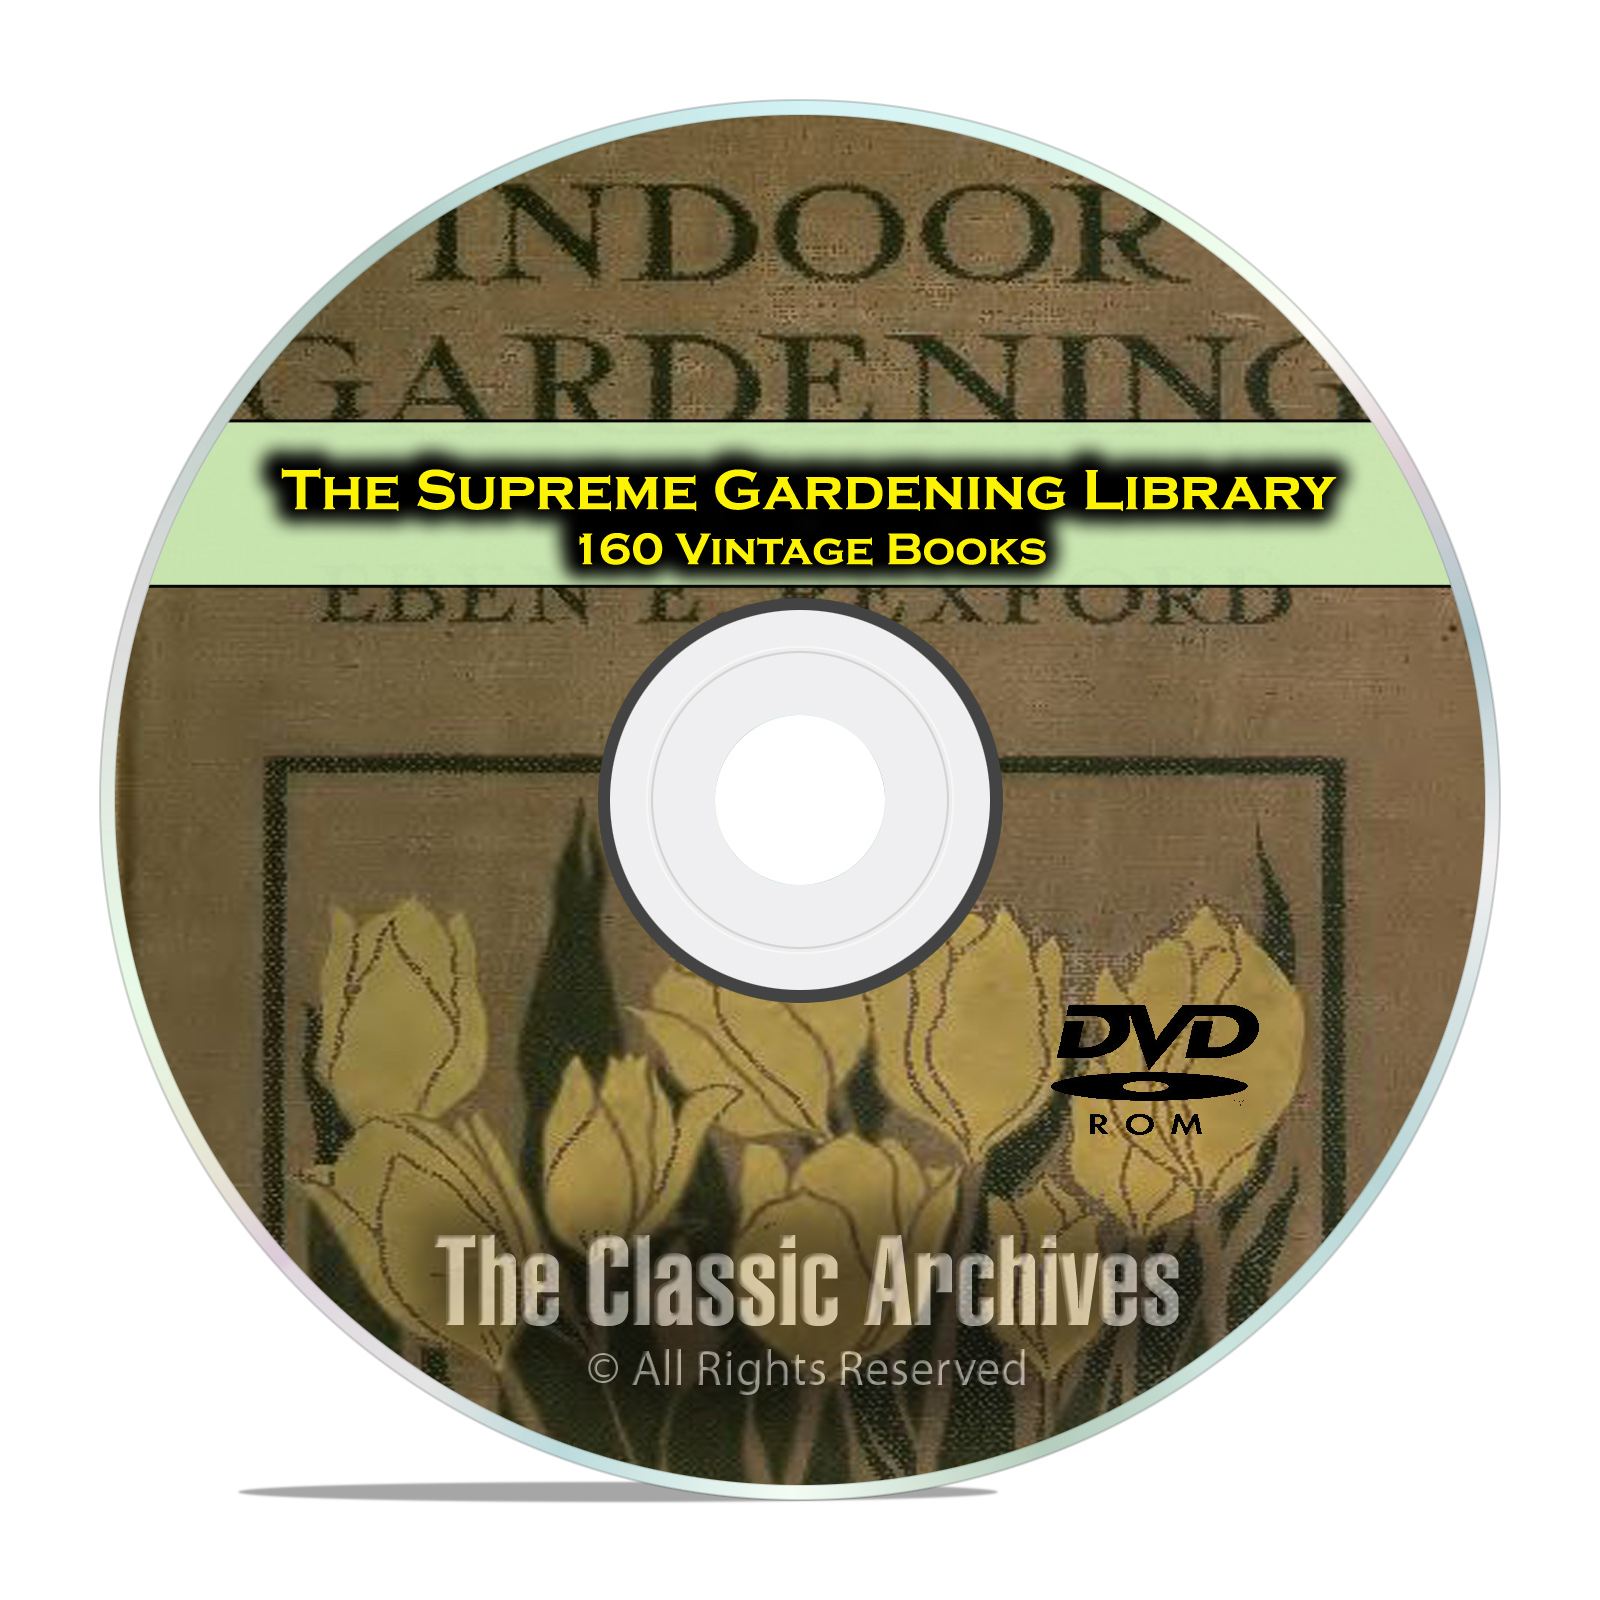 The Supreme Gardening Library, 160 Books Landscaping Garden Plants Grow DVD